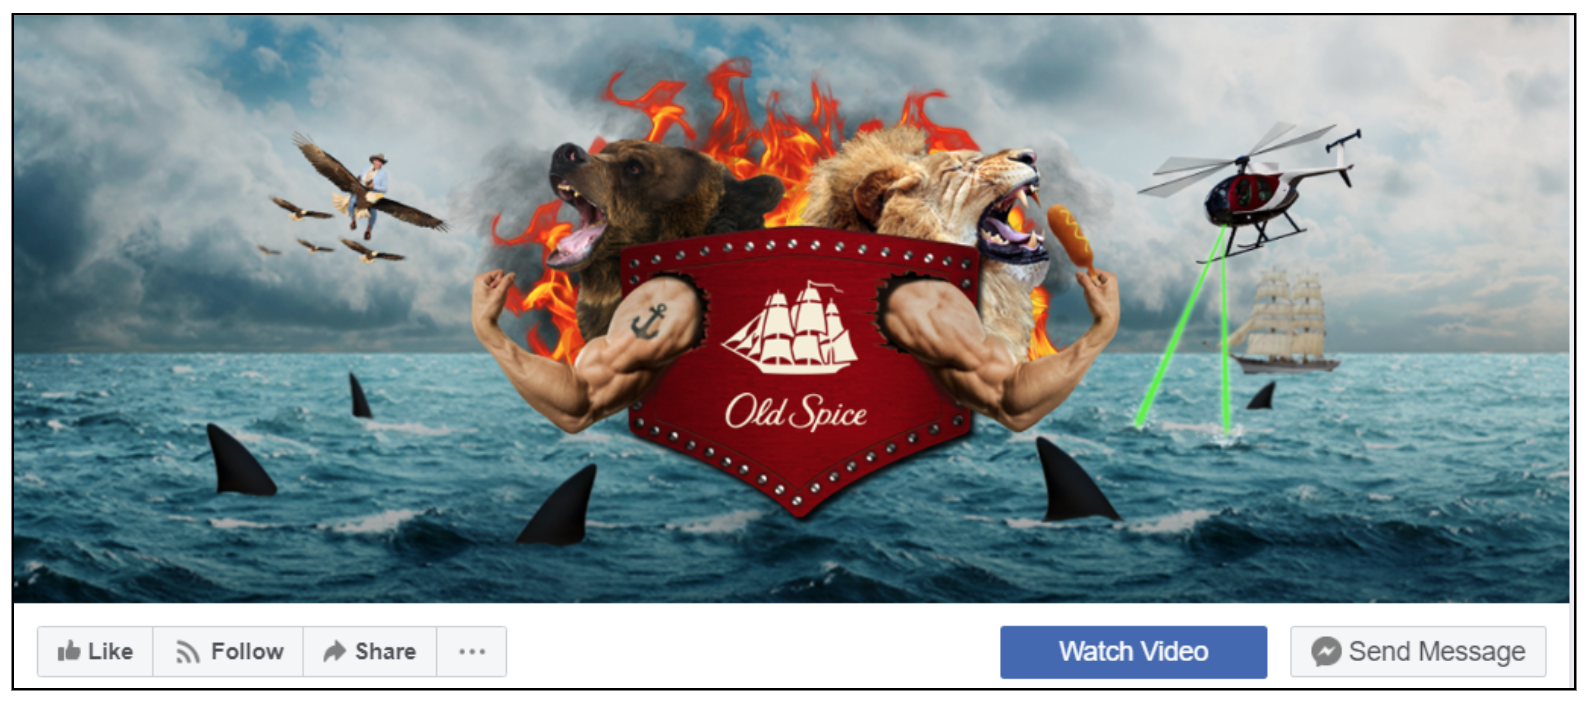 facebook covers 399 pixels wide and 150 pixels tall